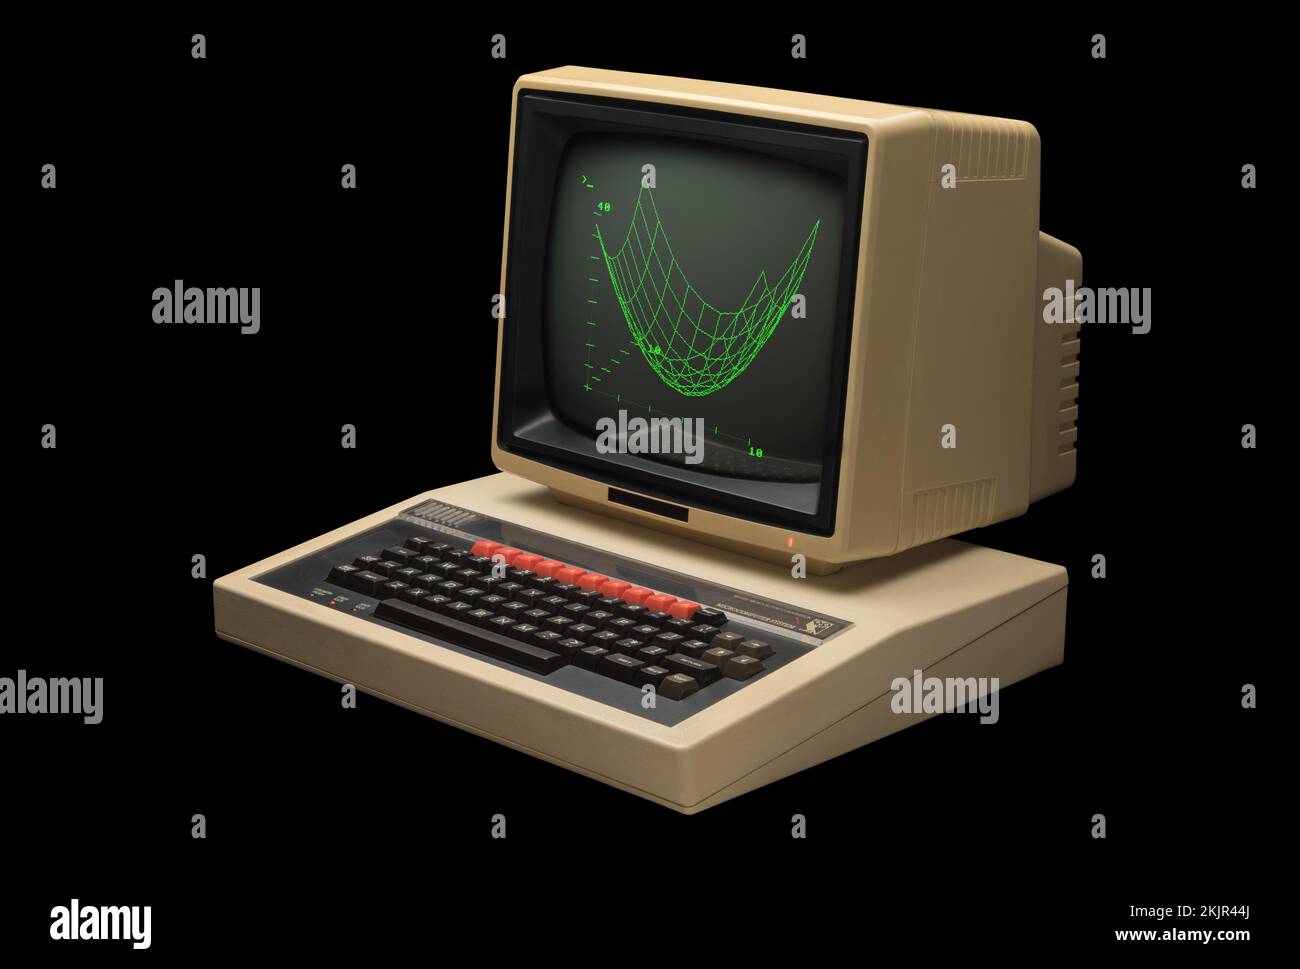 1980s BBC model B microcomputer and green-screen monitor with graphic viewed obliquely on a black background Stock Photo